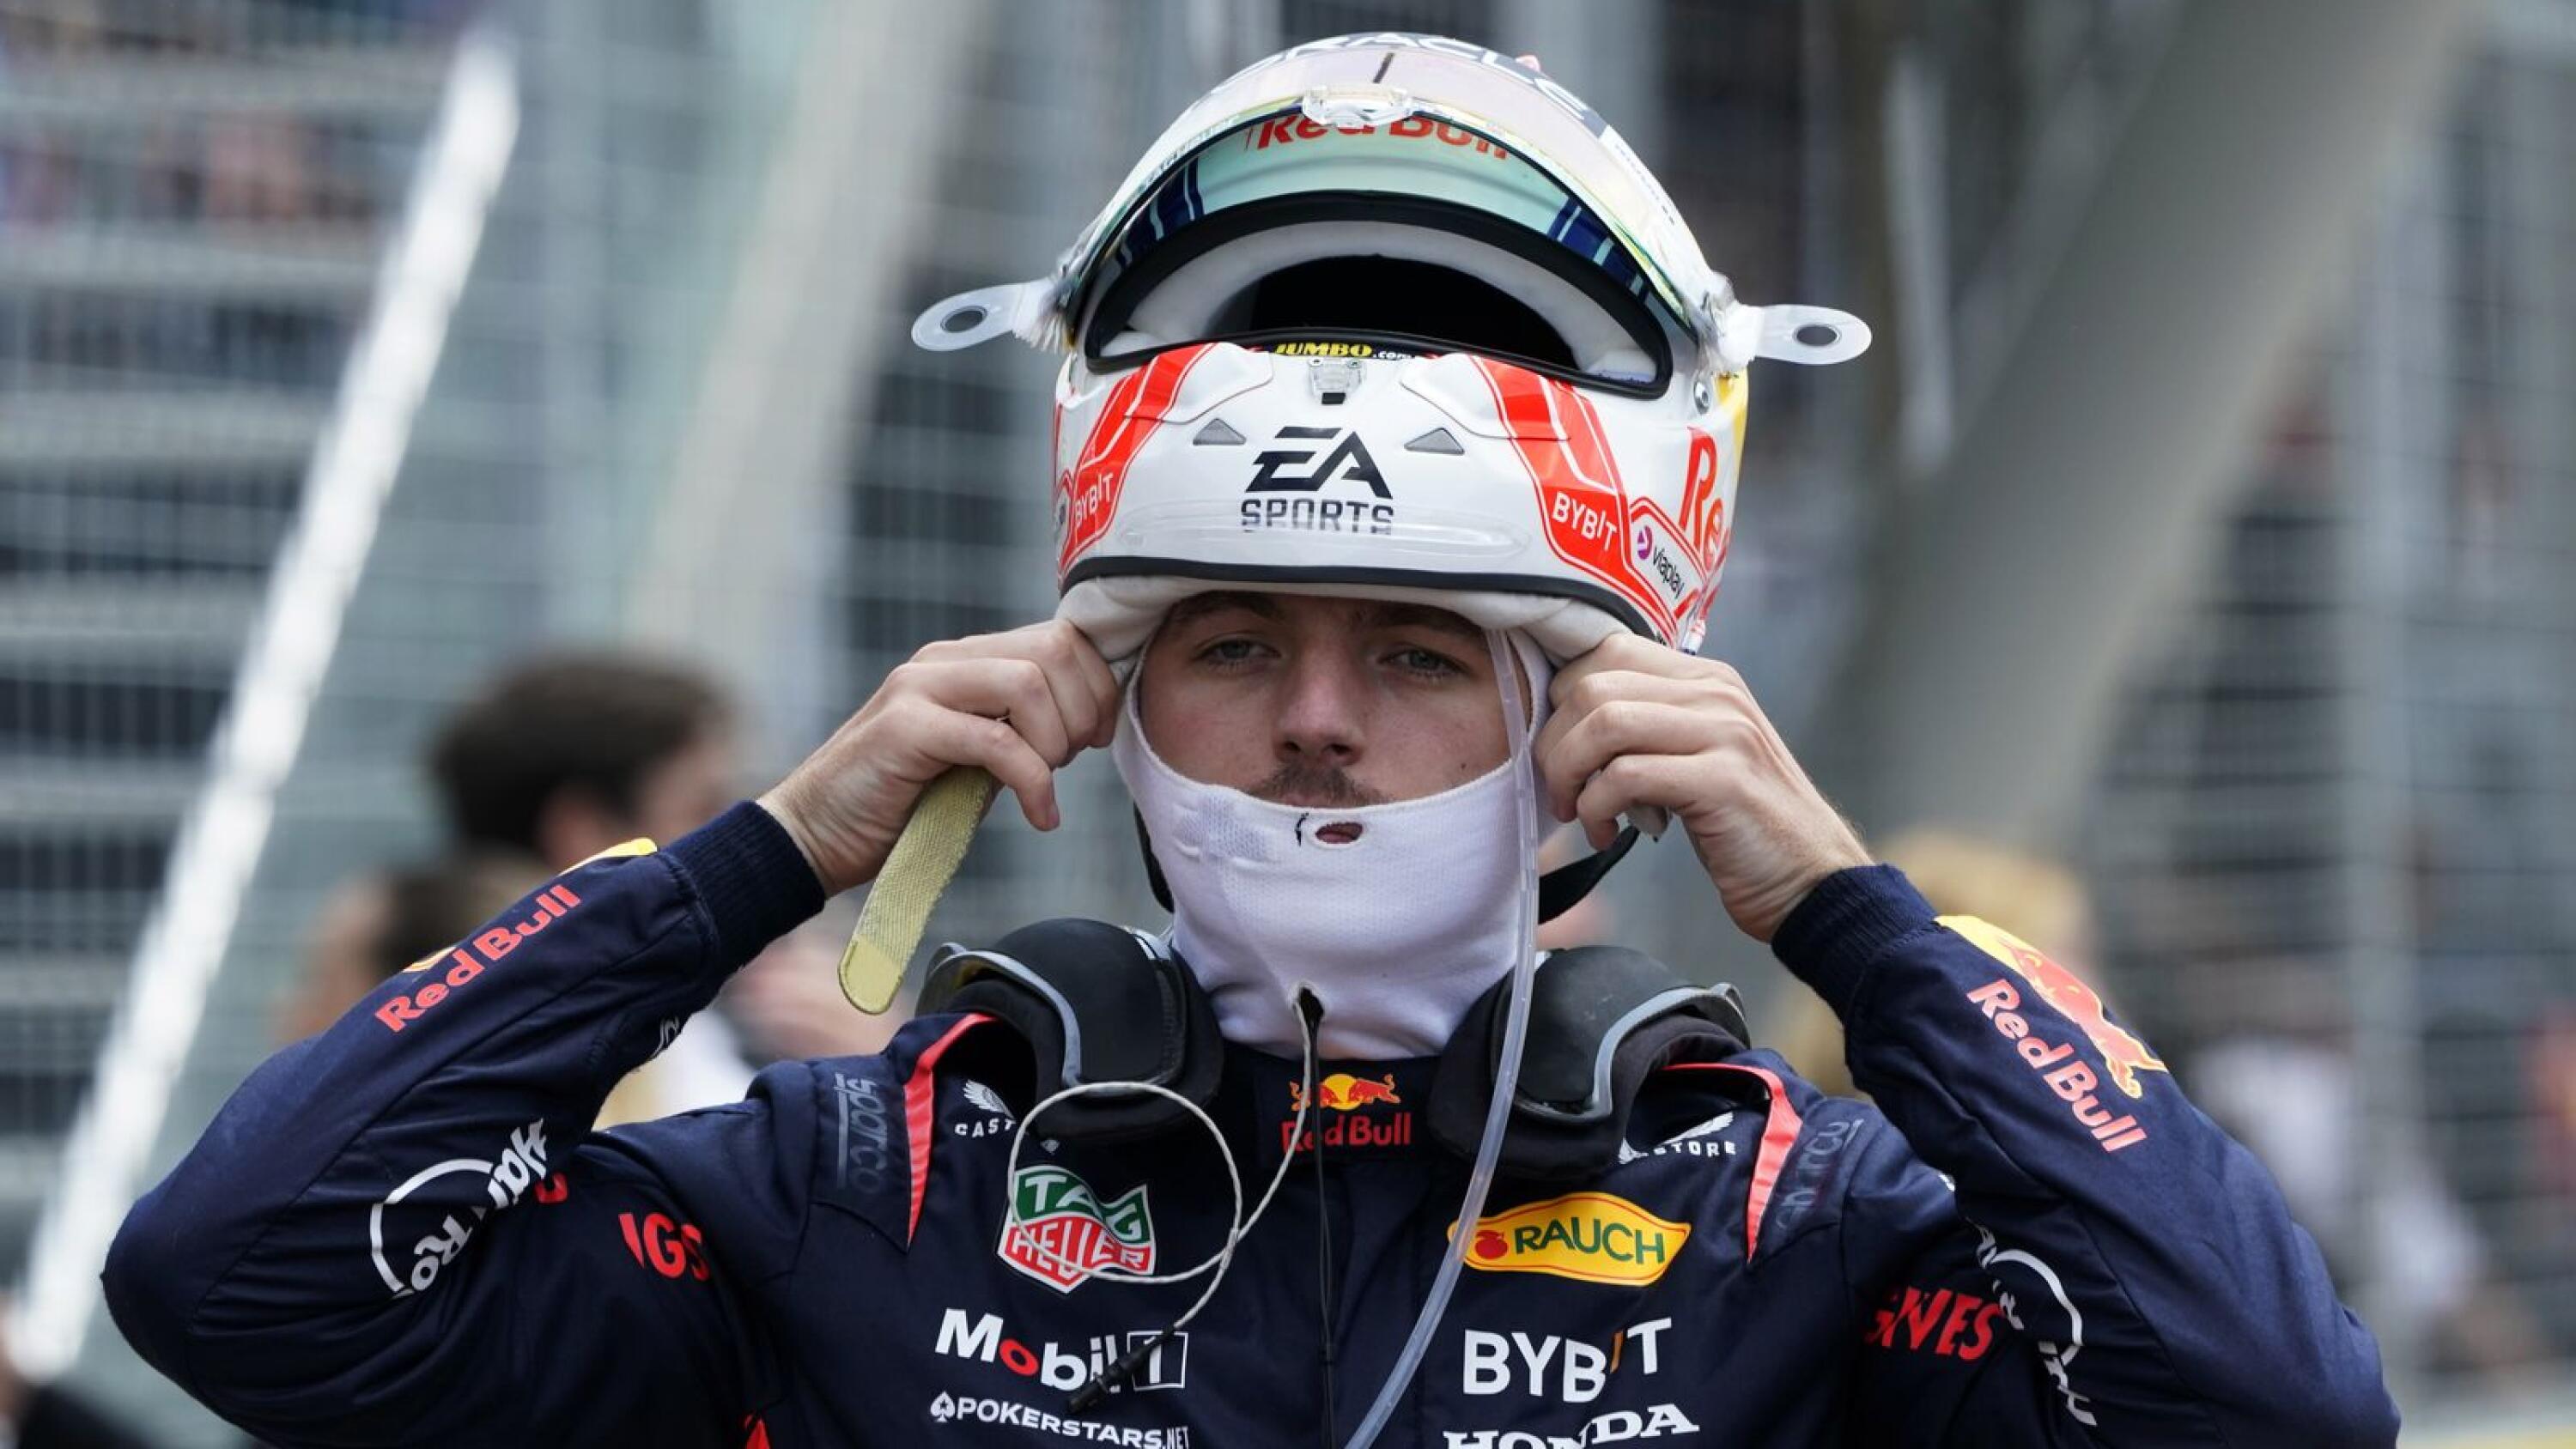 Dutch Formula One driver Max Verstappen of Red Bull Racing during the Formula 1 Grand Prix of Canada, at the Circuit Gilles-Villeneuve race track in Montreal, Canada